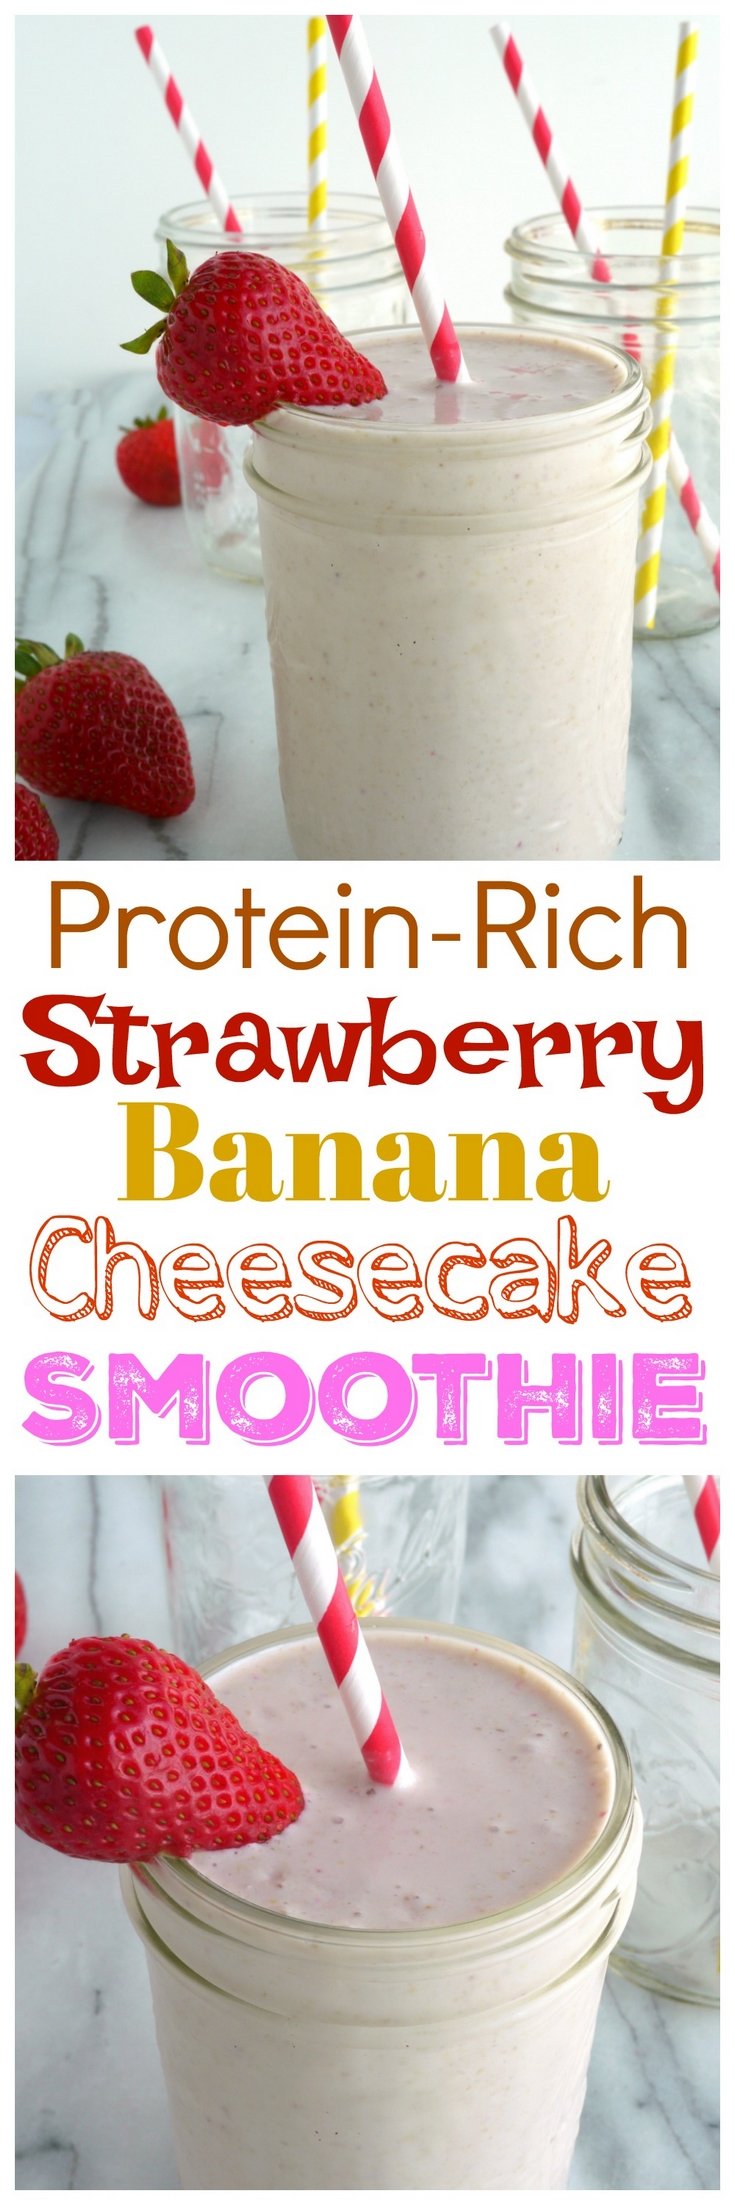 This rich and delicious Protein Rich Strawberry Banana Cheesecake Smoothie has the perfect sweet and tangy balance just like your favorite piece of cheesecake. via @cmpollak1